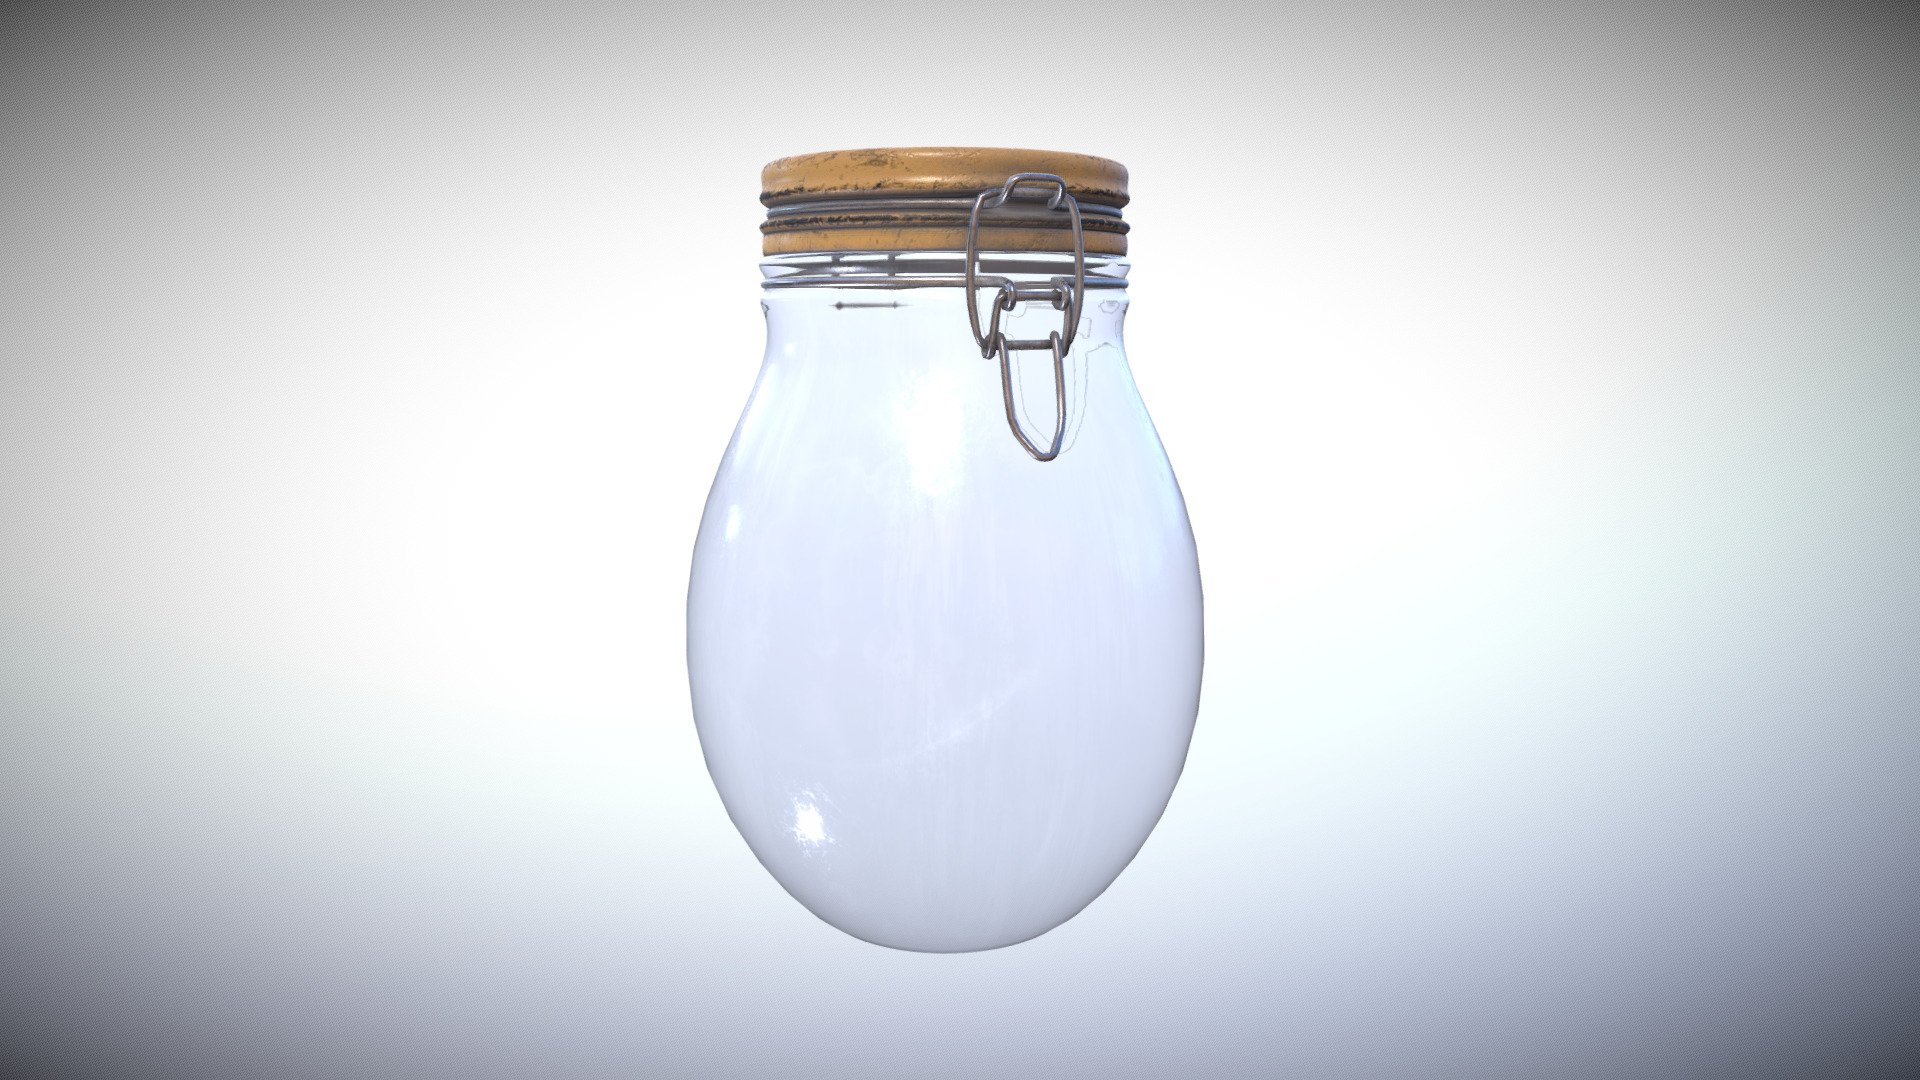 Jar - Hermetic Glass Container.
UV Unwrapped and textured. 
Comes with textures at 4096x4096 resolution. 

The model contains 3 objects, 2 sets of material, and 1 set of textures. 
Modeled in Blender, painted in Substance Painter. 

Blend file before modifiers has 792 Faces, and 820 Vertices. Particle hairs included 3d model